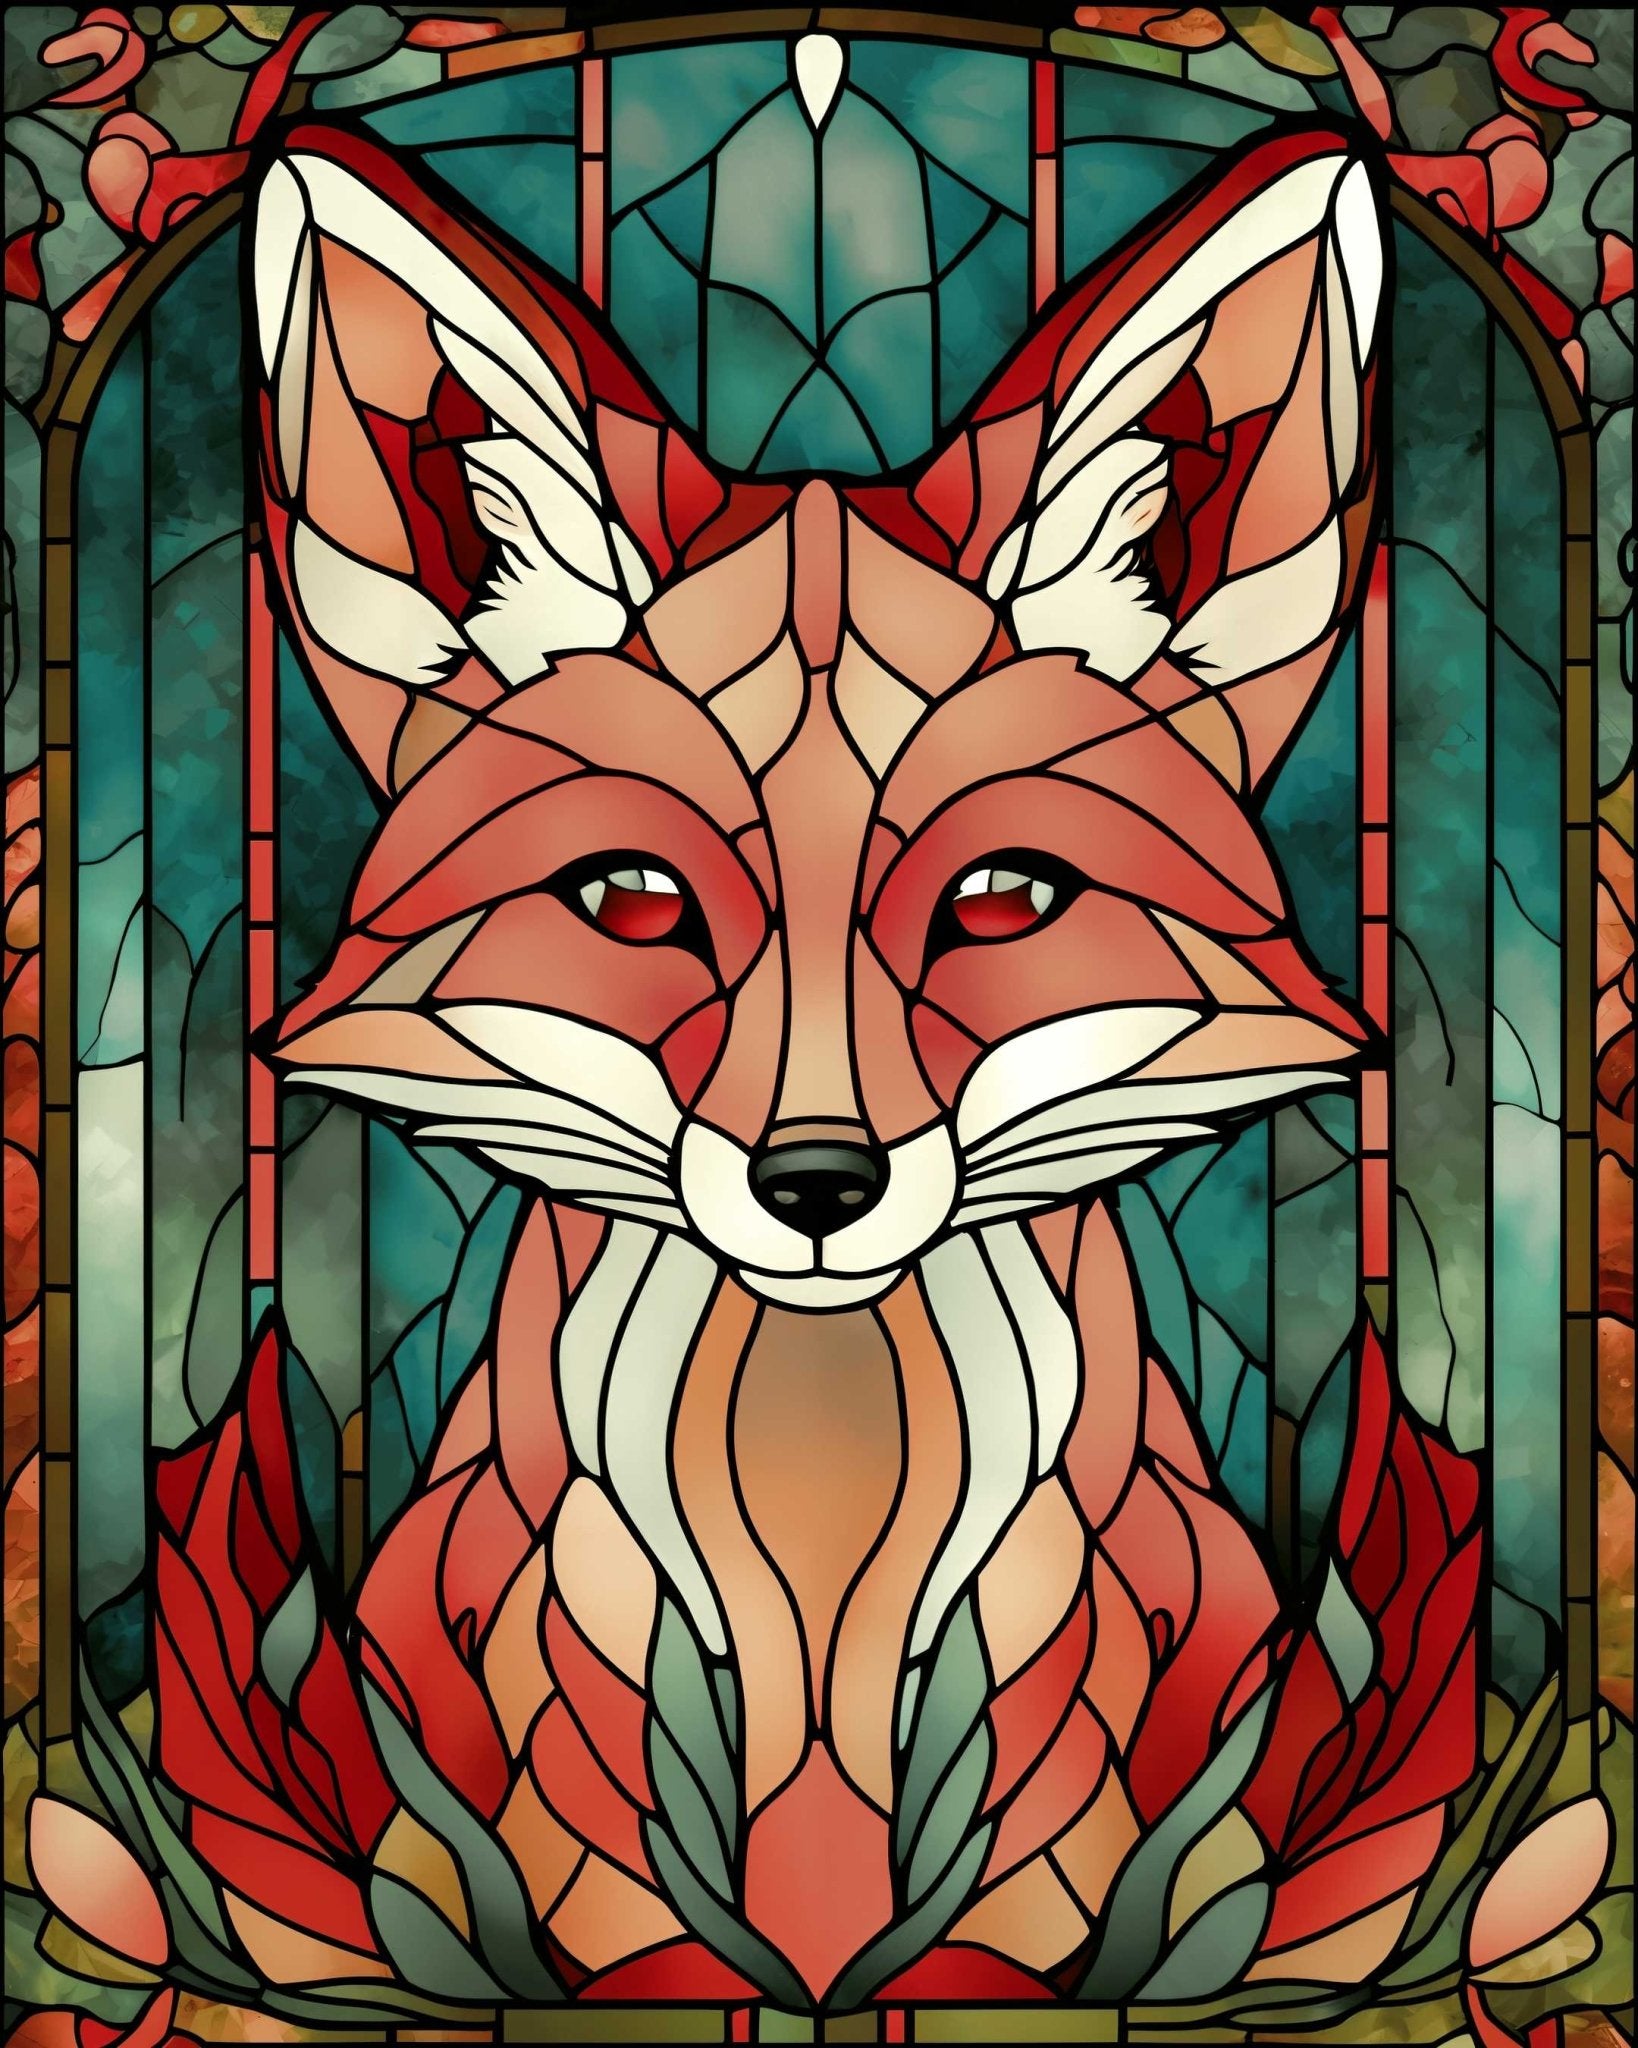 Flaming fox - Poster - Ever colorful